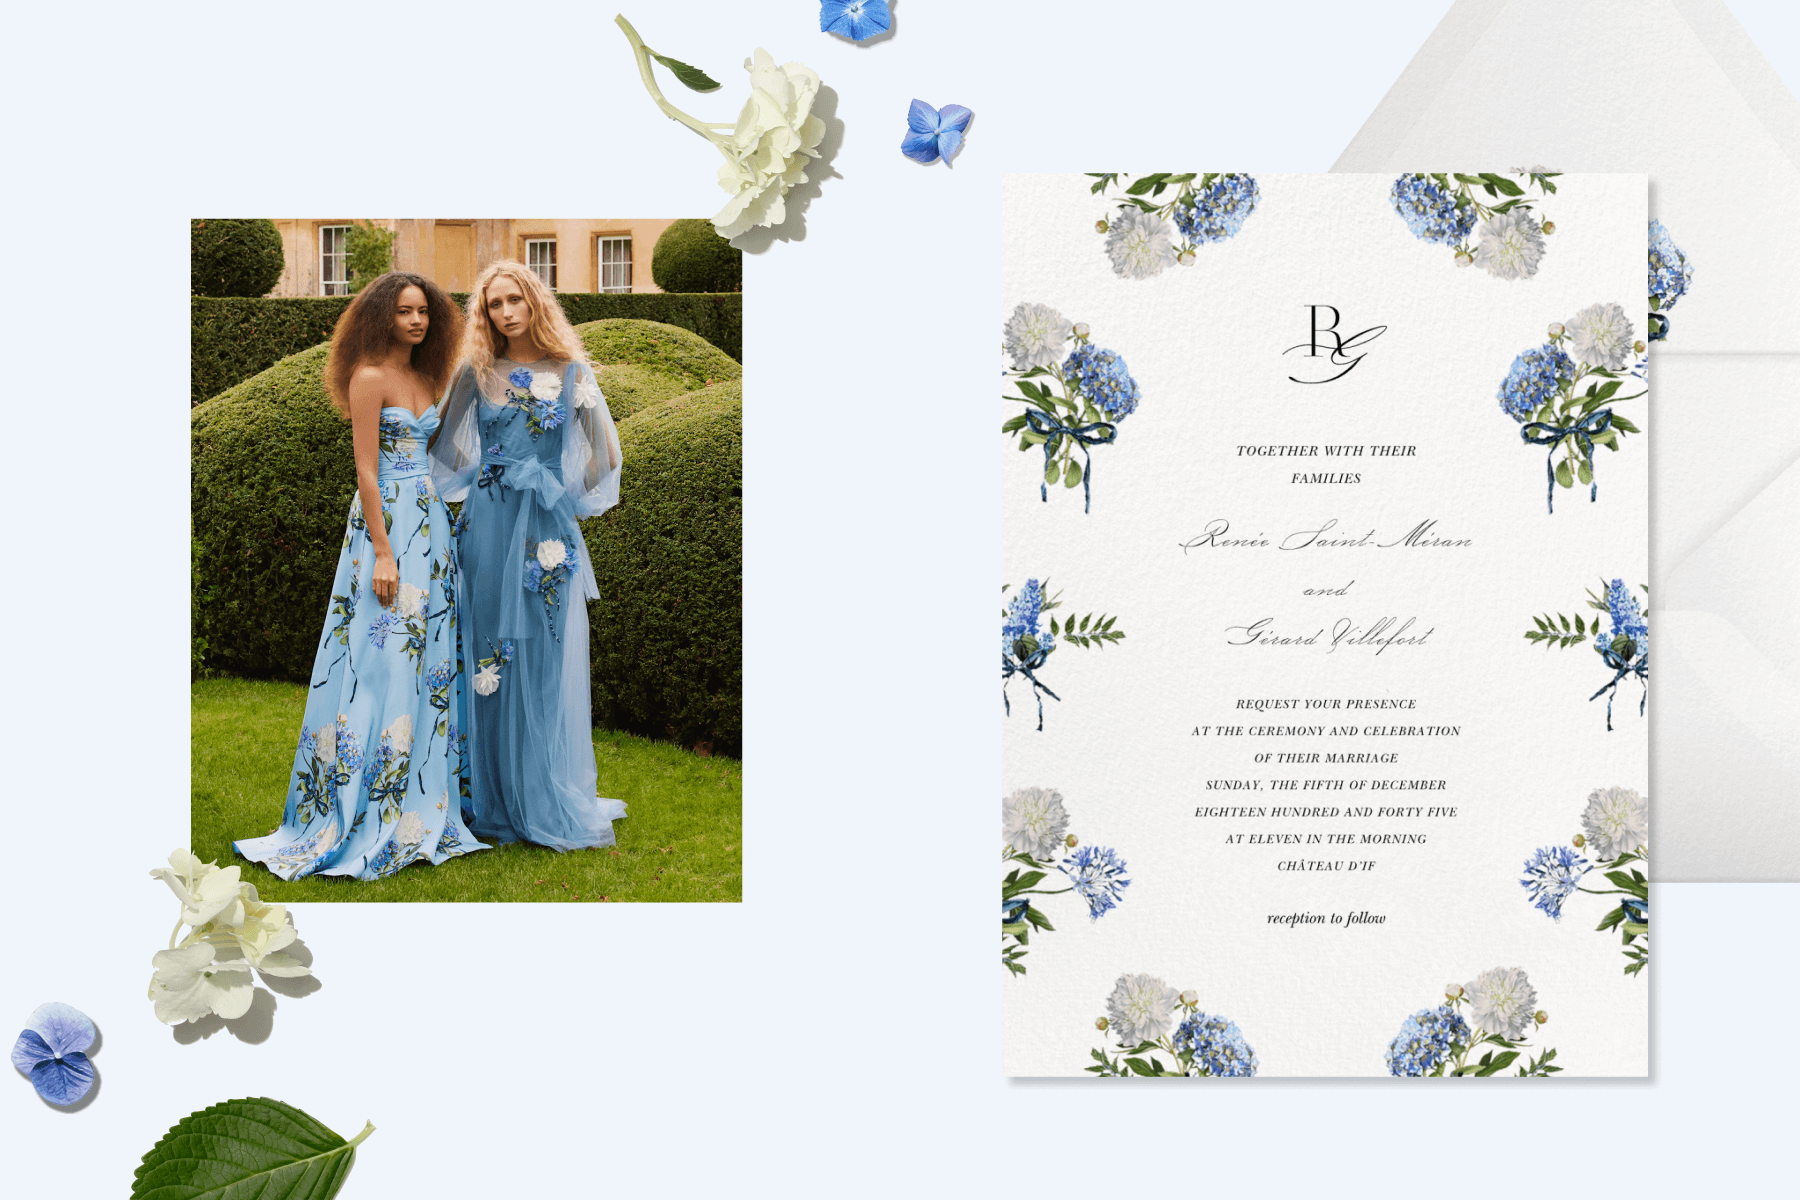 Left: Image of two women in long flowing blue gowns with white hydrangea motifs on them; Right: Invitation with a mixture of white and light blue hydrangeas framing the text